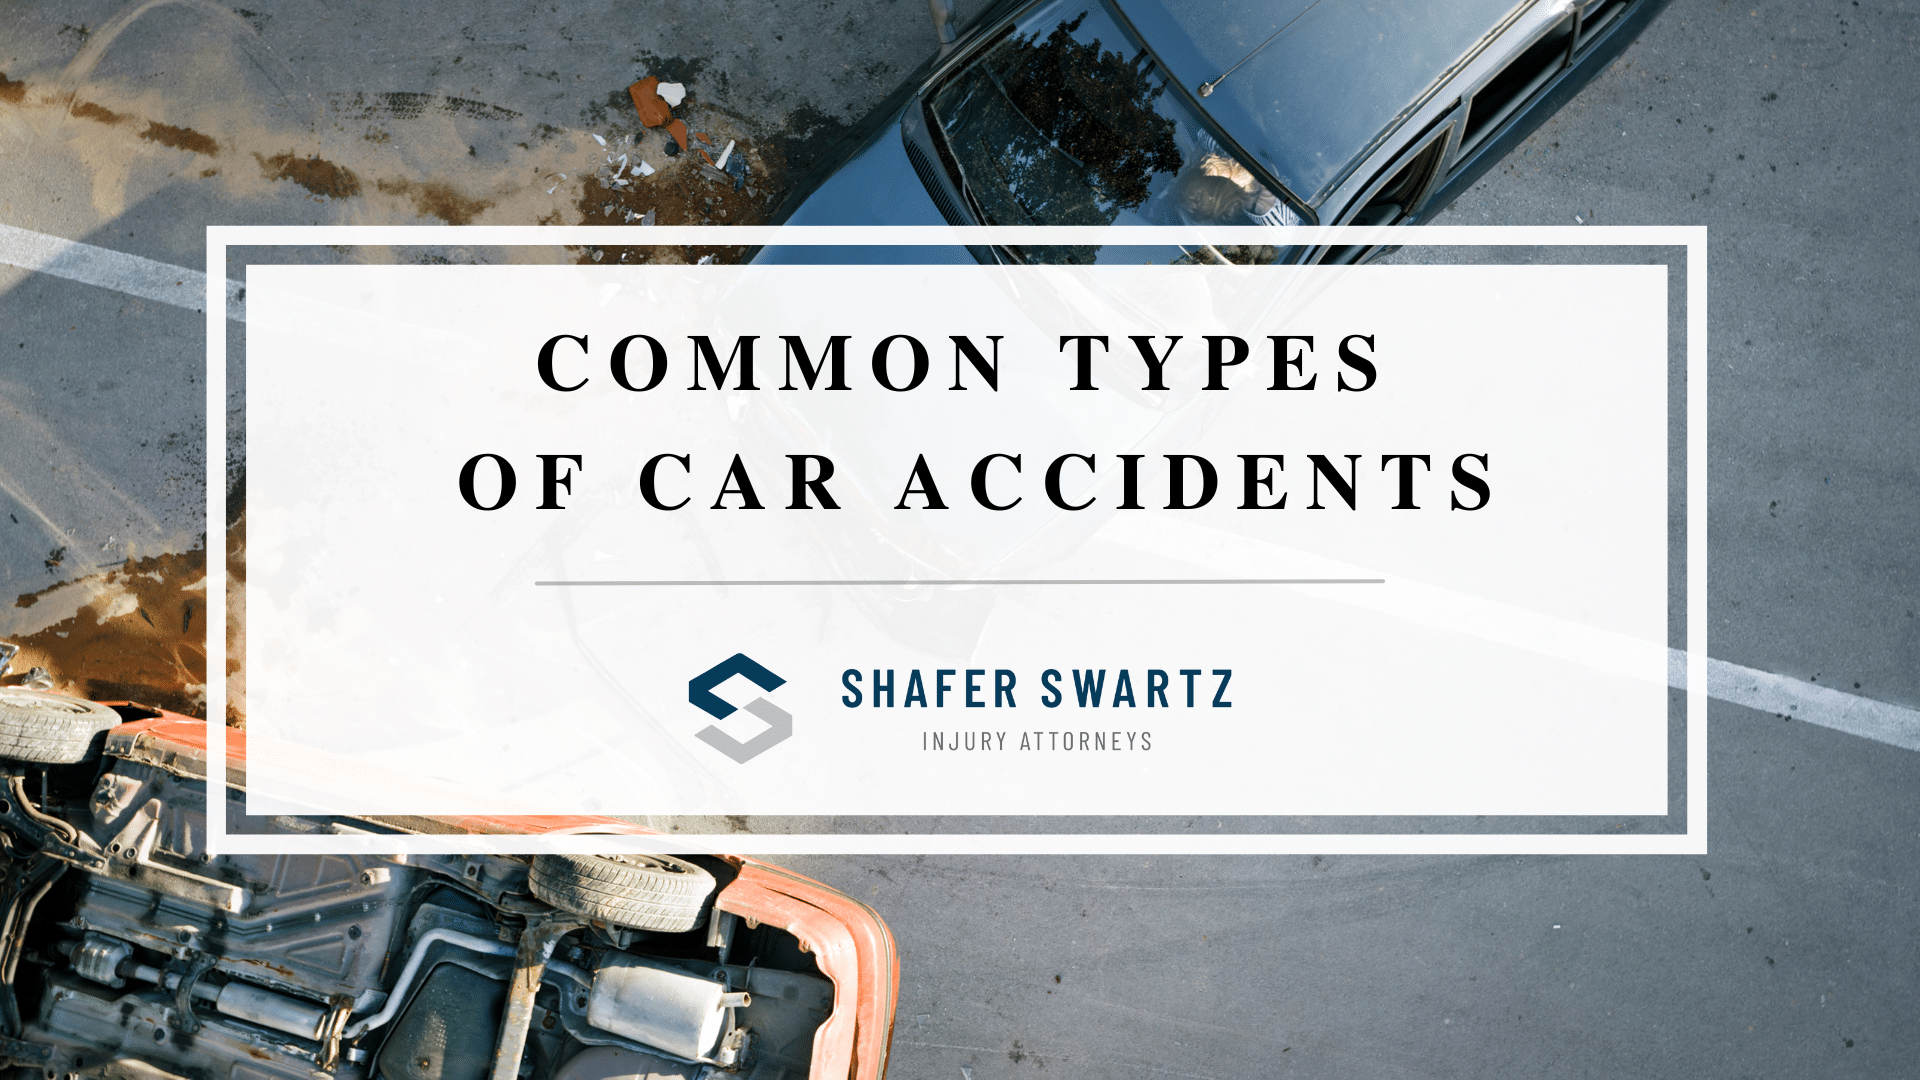 Common Types of Car Accidents